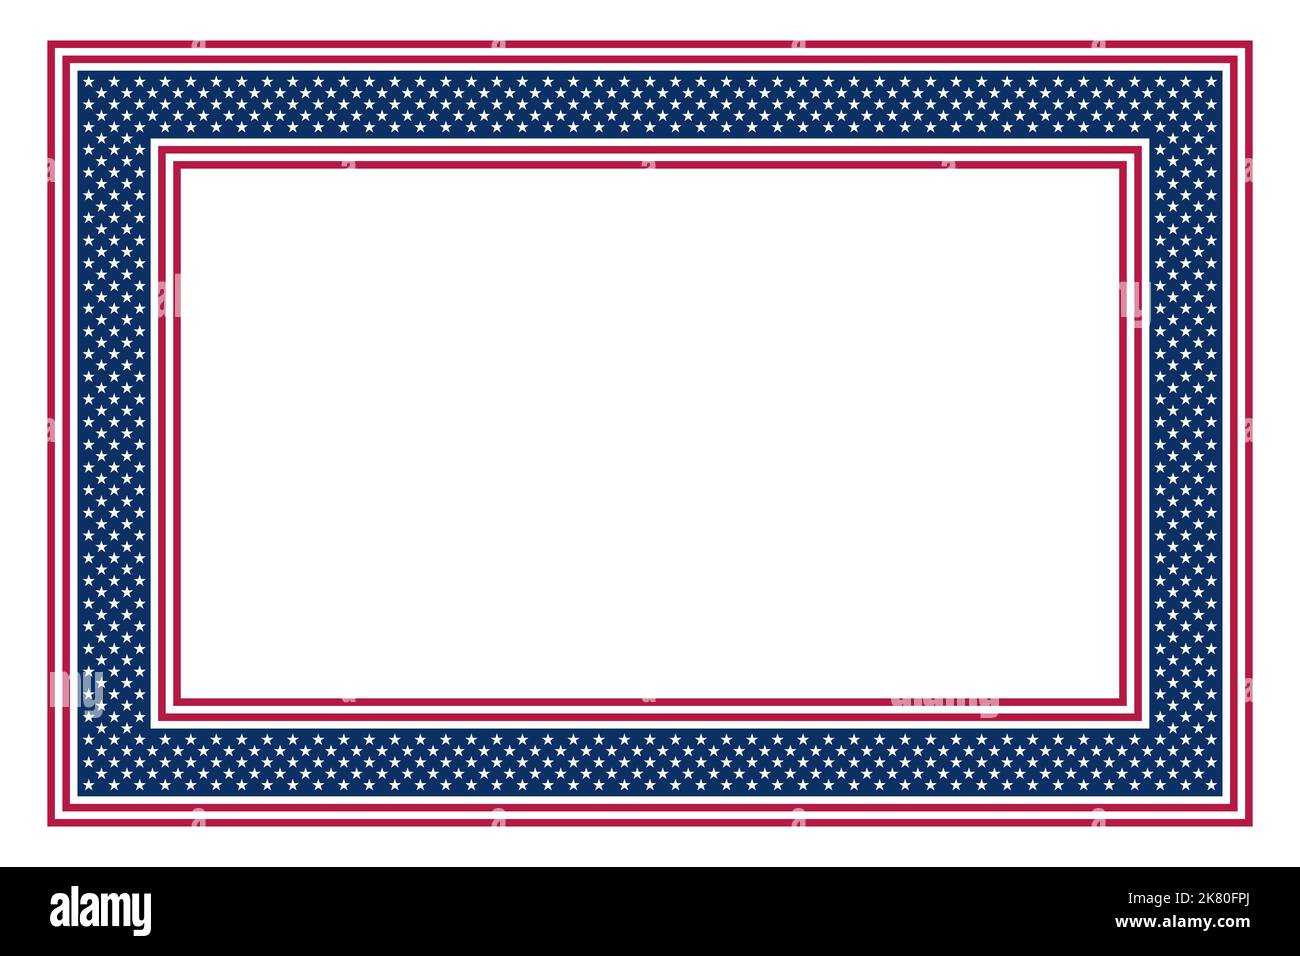 National flag of United States motif, rectangular frame. Rectangle border of stars and stripes pattern, based on the American flag. Stock Photo